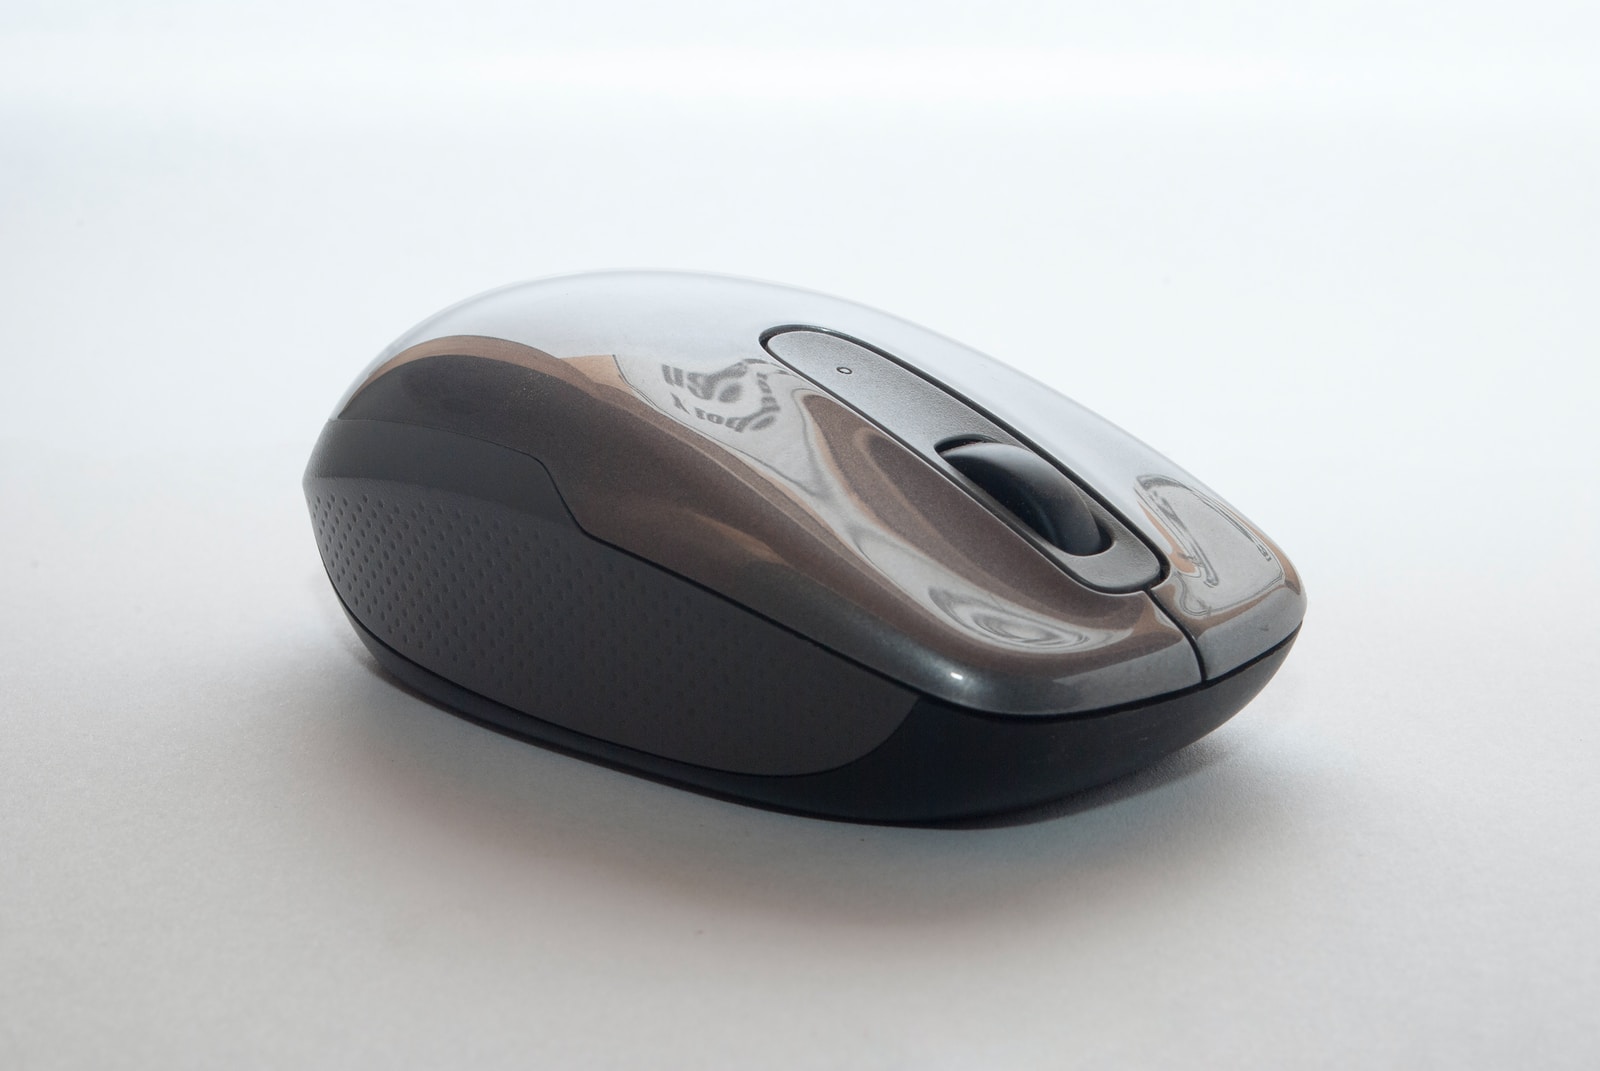 closeup photo of gray and black cordless mouse